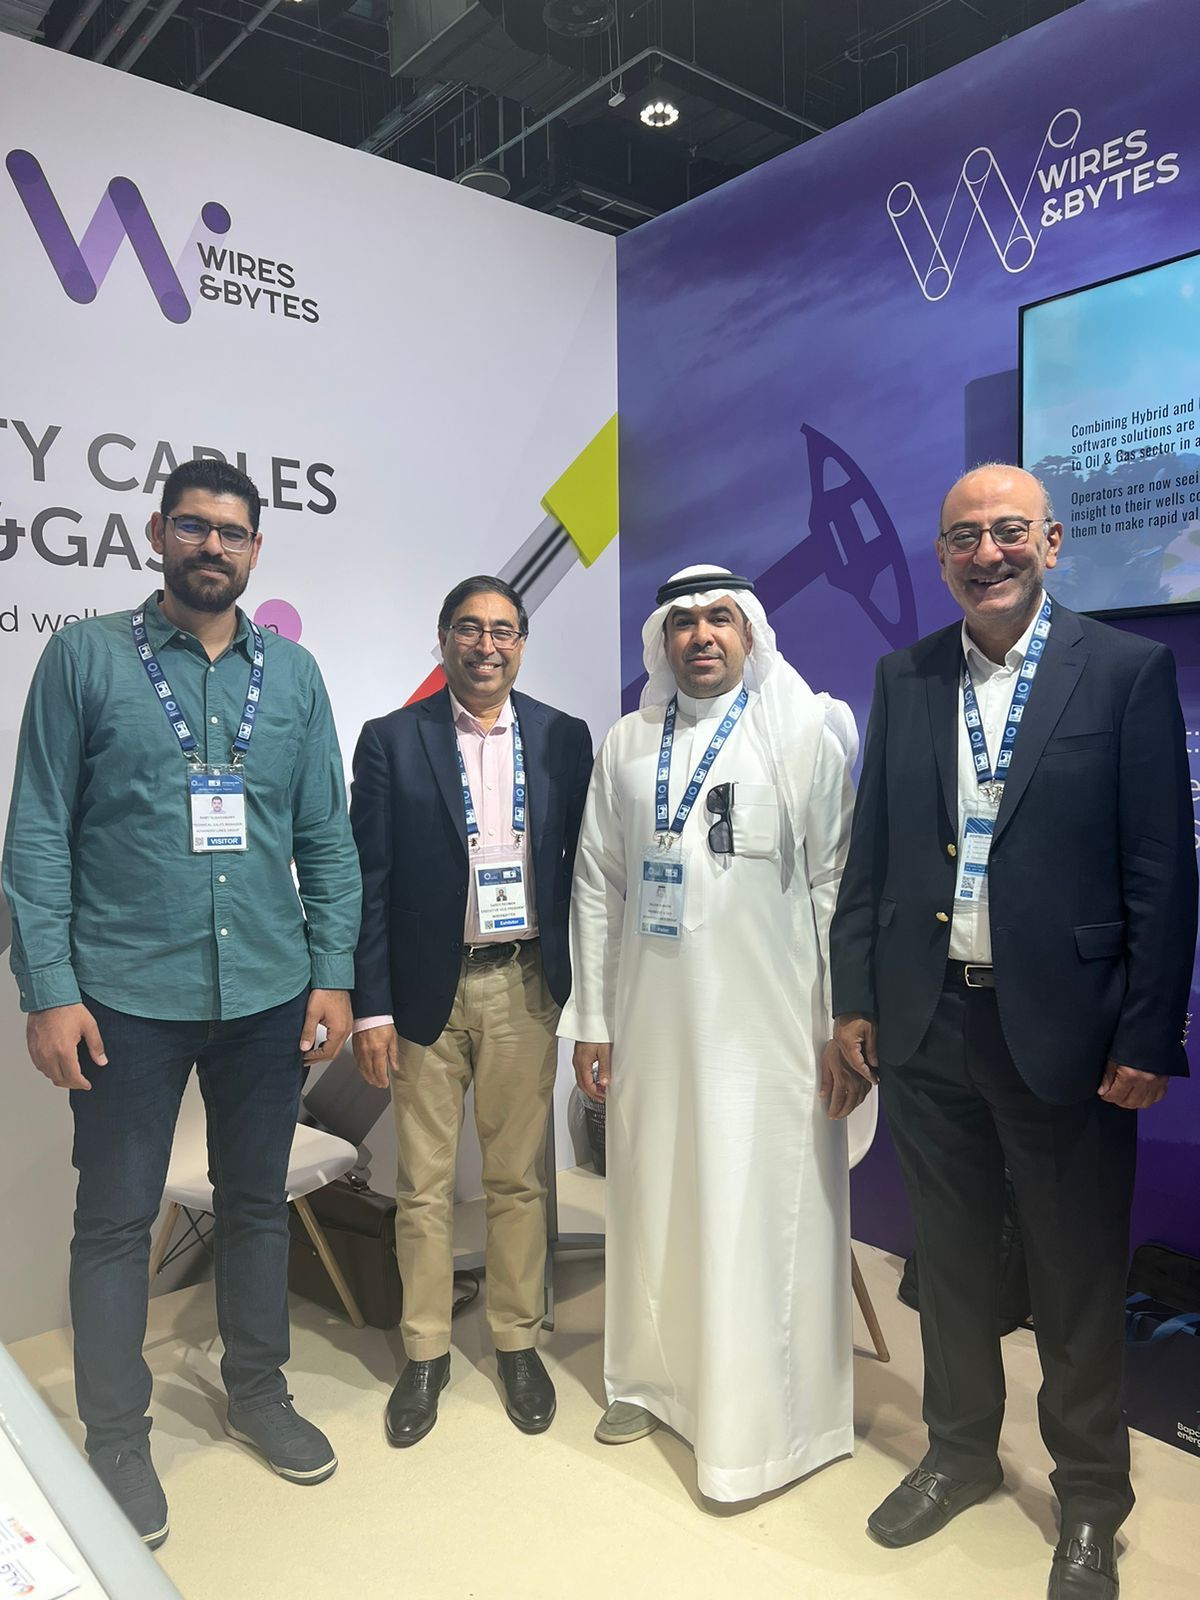 Wires&Bytes with ALG at ADIPEC